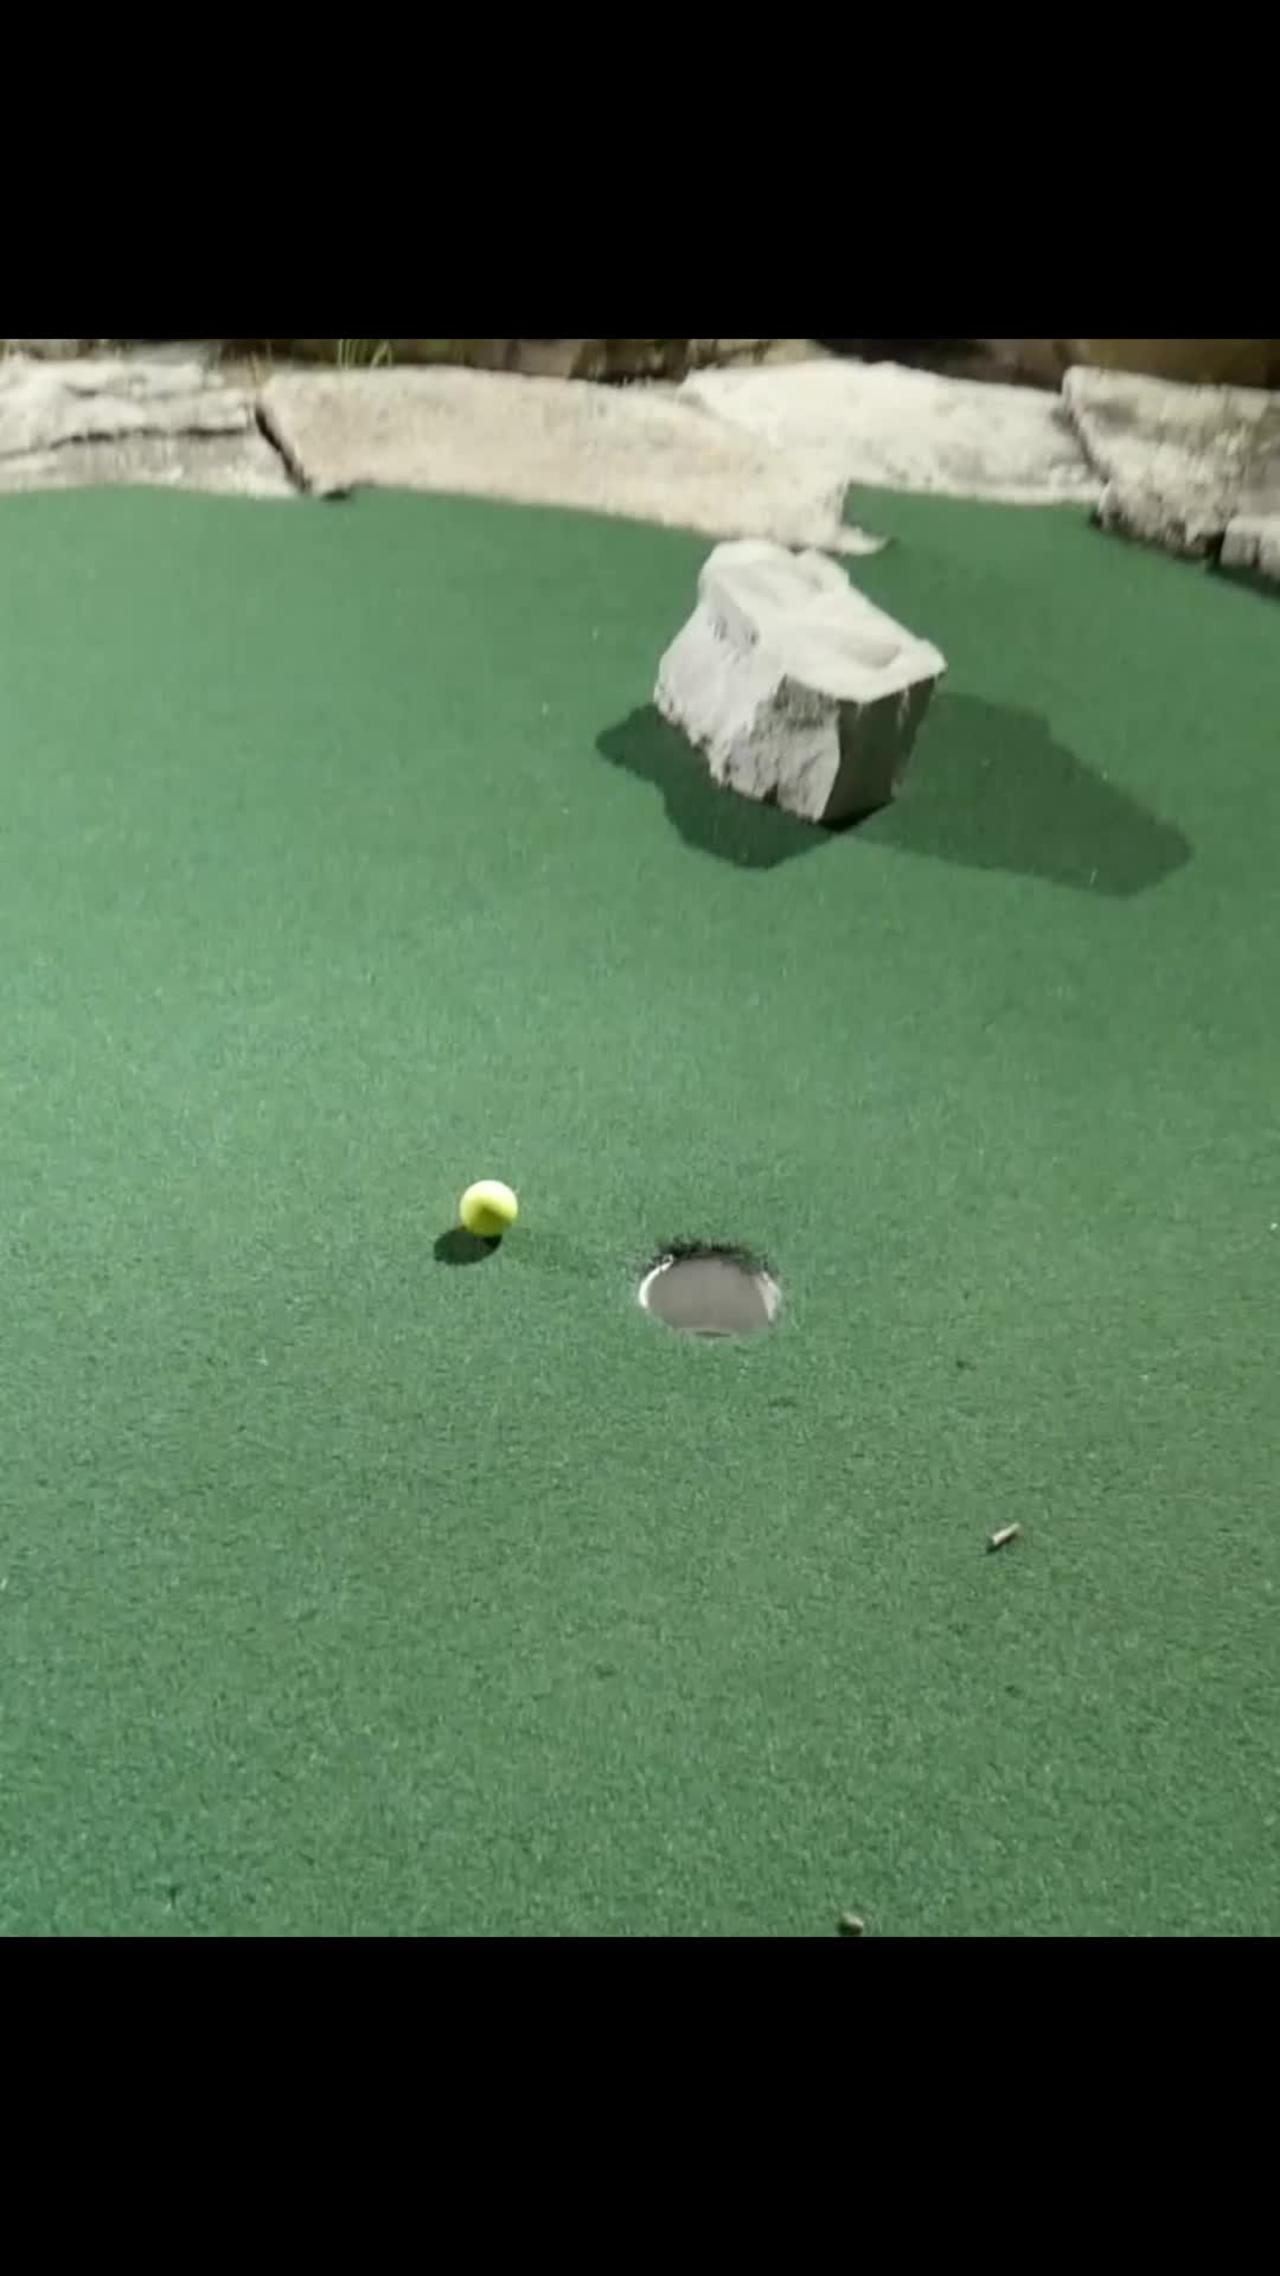 The Most Alarming Mini Golf Hole In One In This World